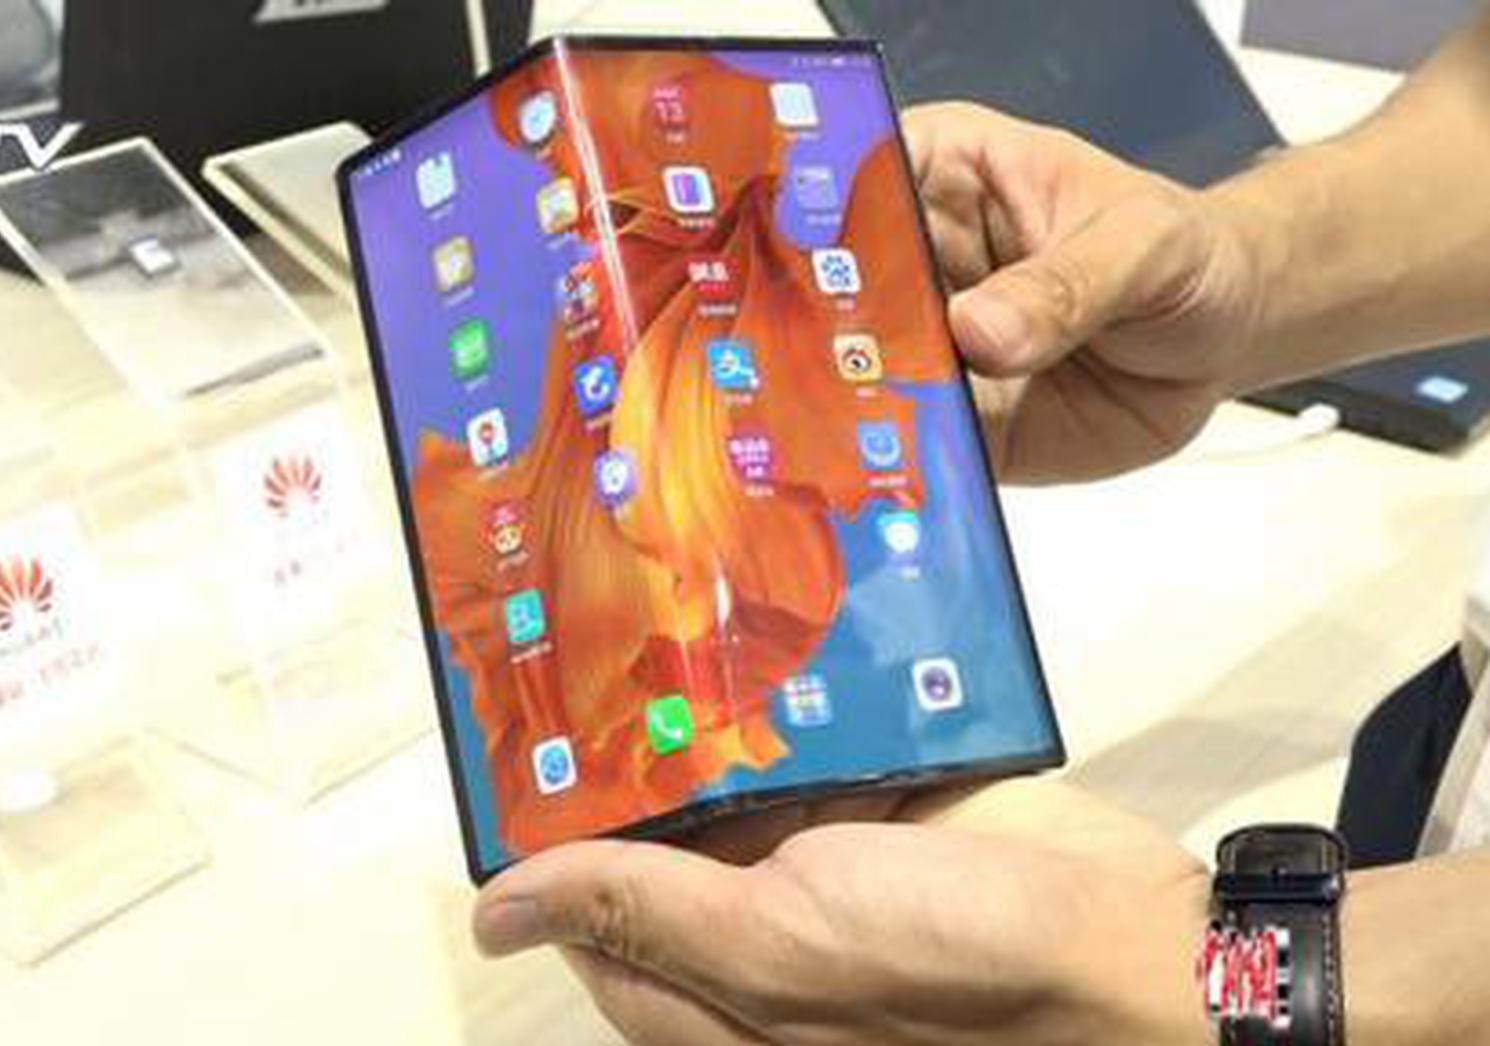 Foldable phones surge in popularity amid stagnant market